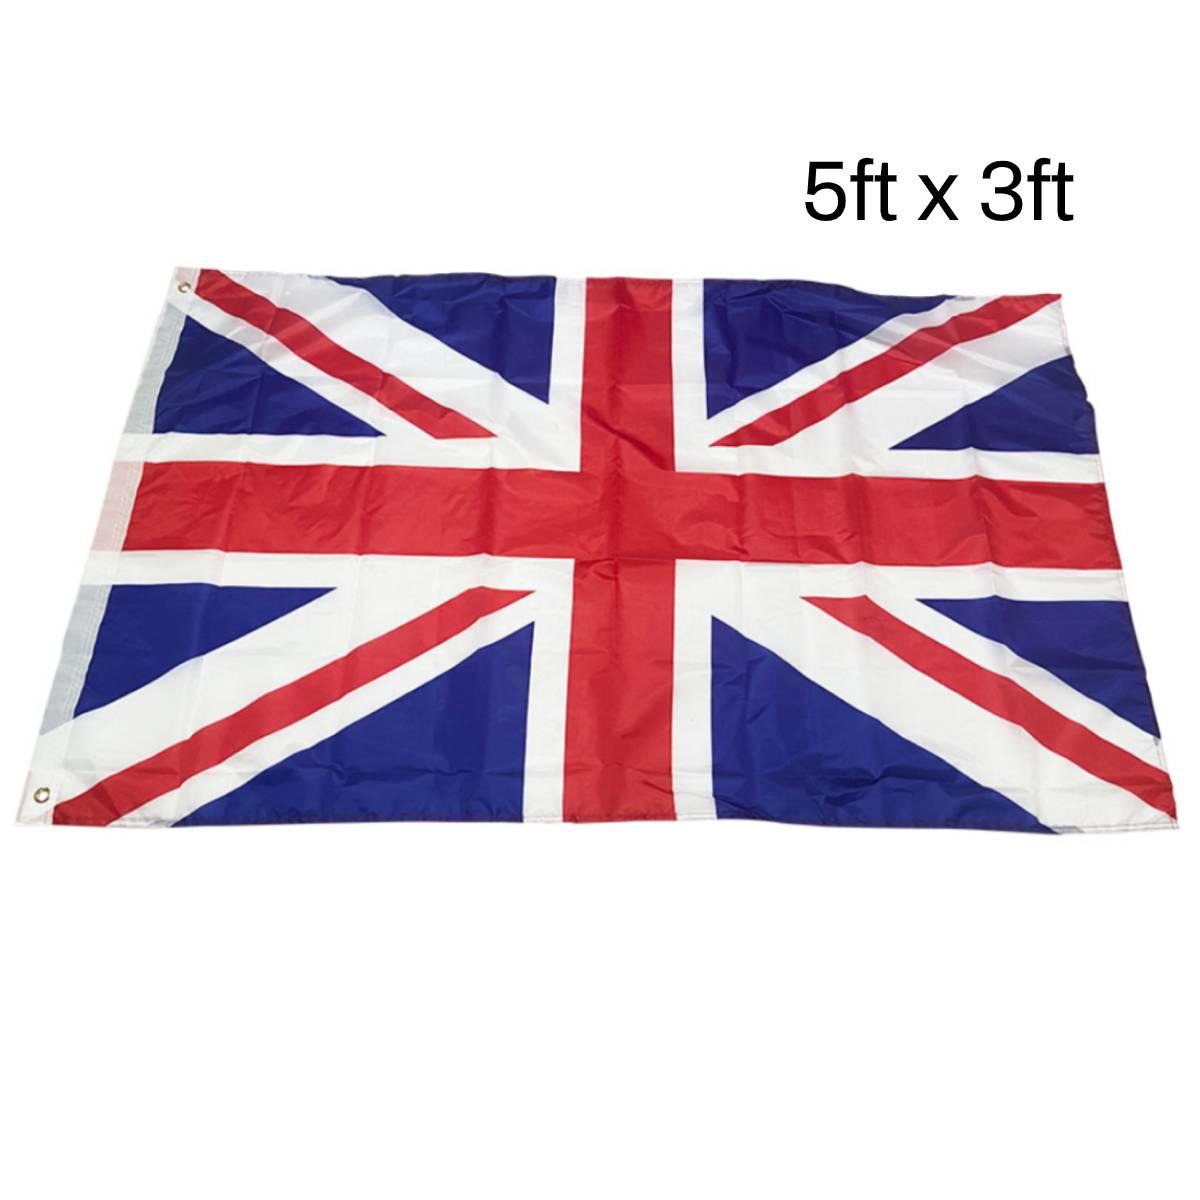 5ft x 3ft Union Jack Flag in polyester with two metal eyelets. By Wicked AC-9440 available here at Karnival Costumes online party shop